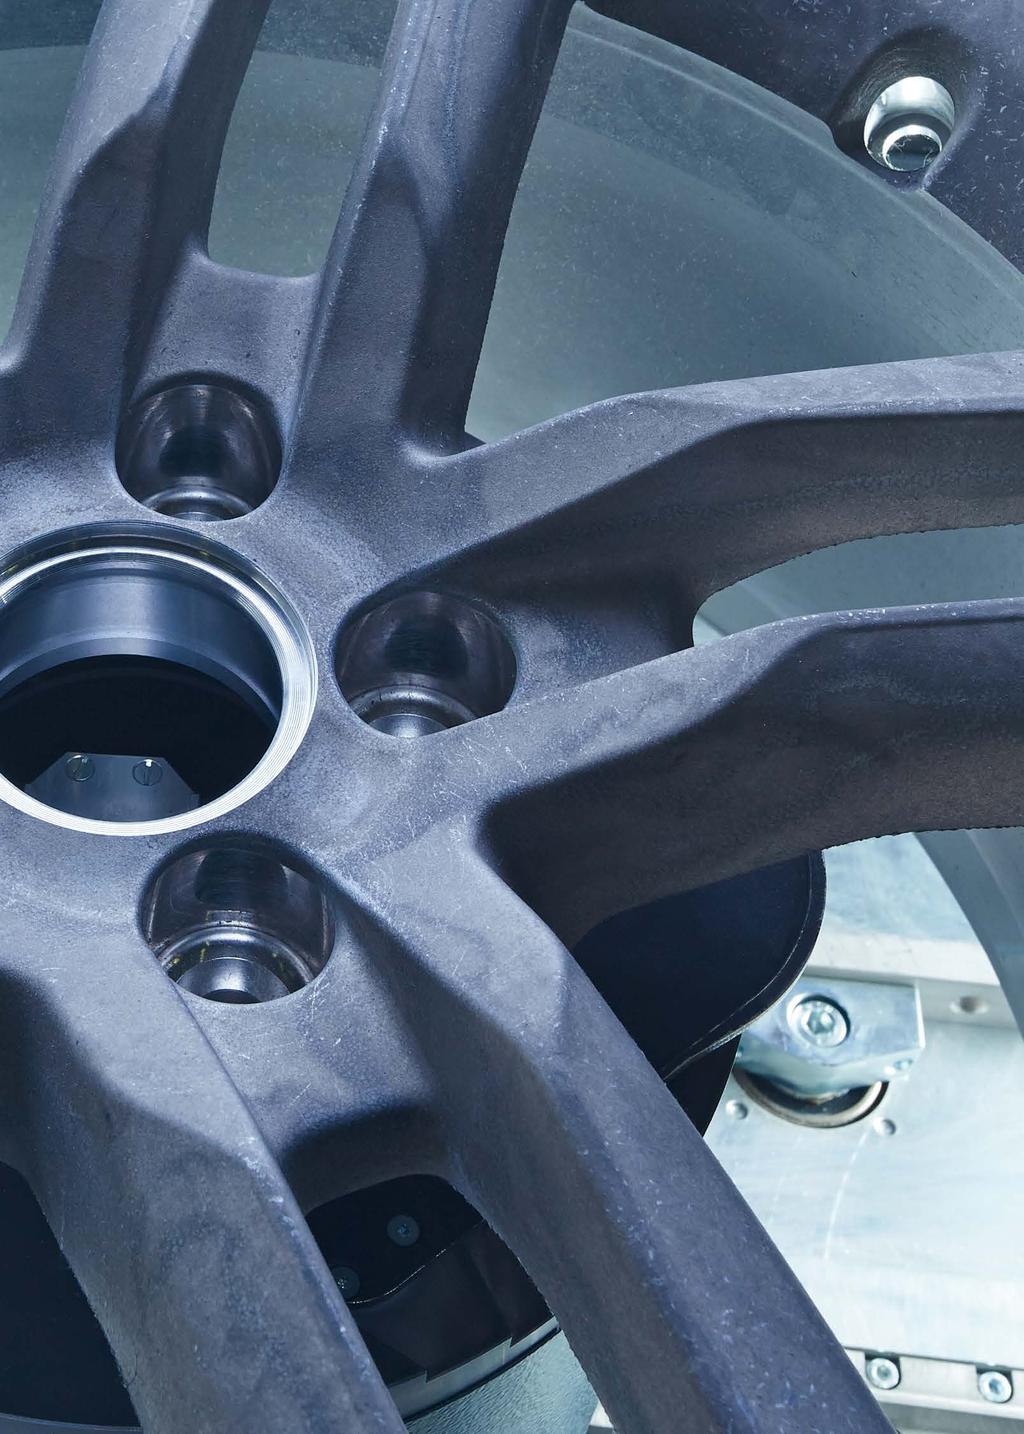 OFFSET Offset ET is the distance form the wheel attachment face to half the rim width.